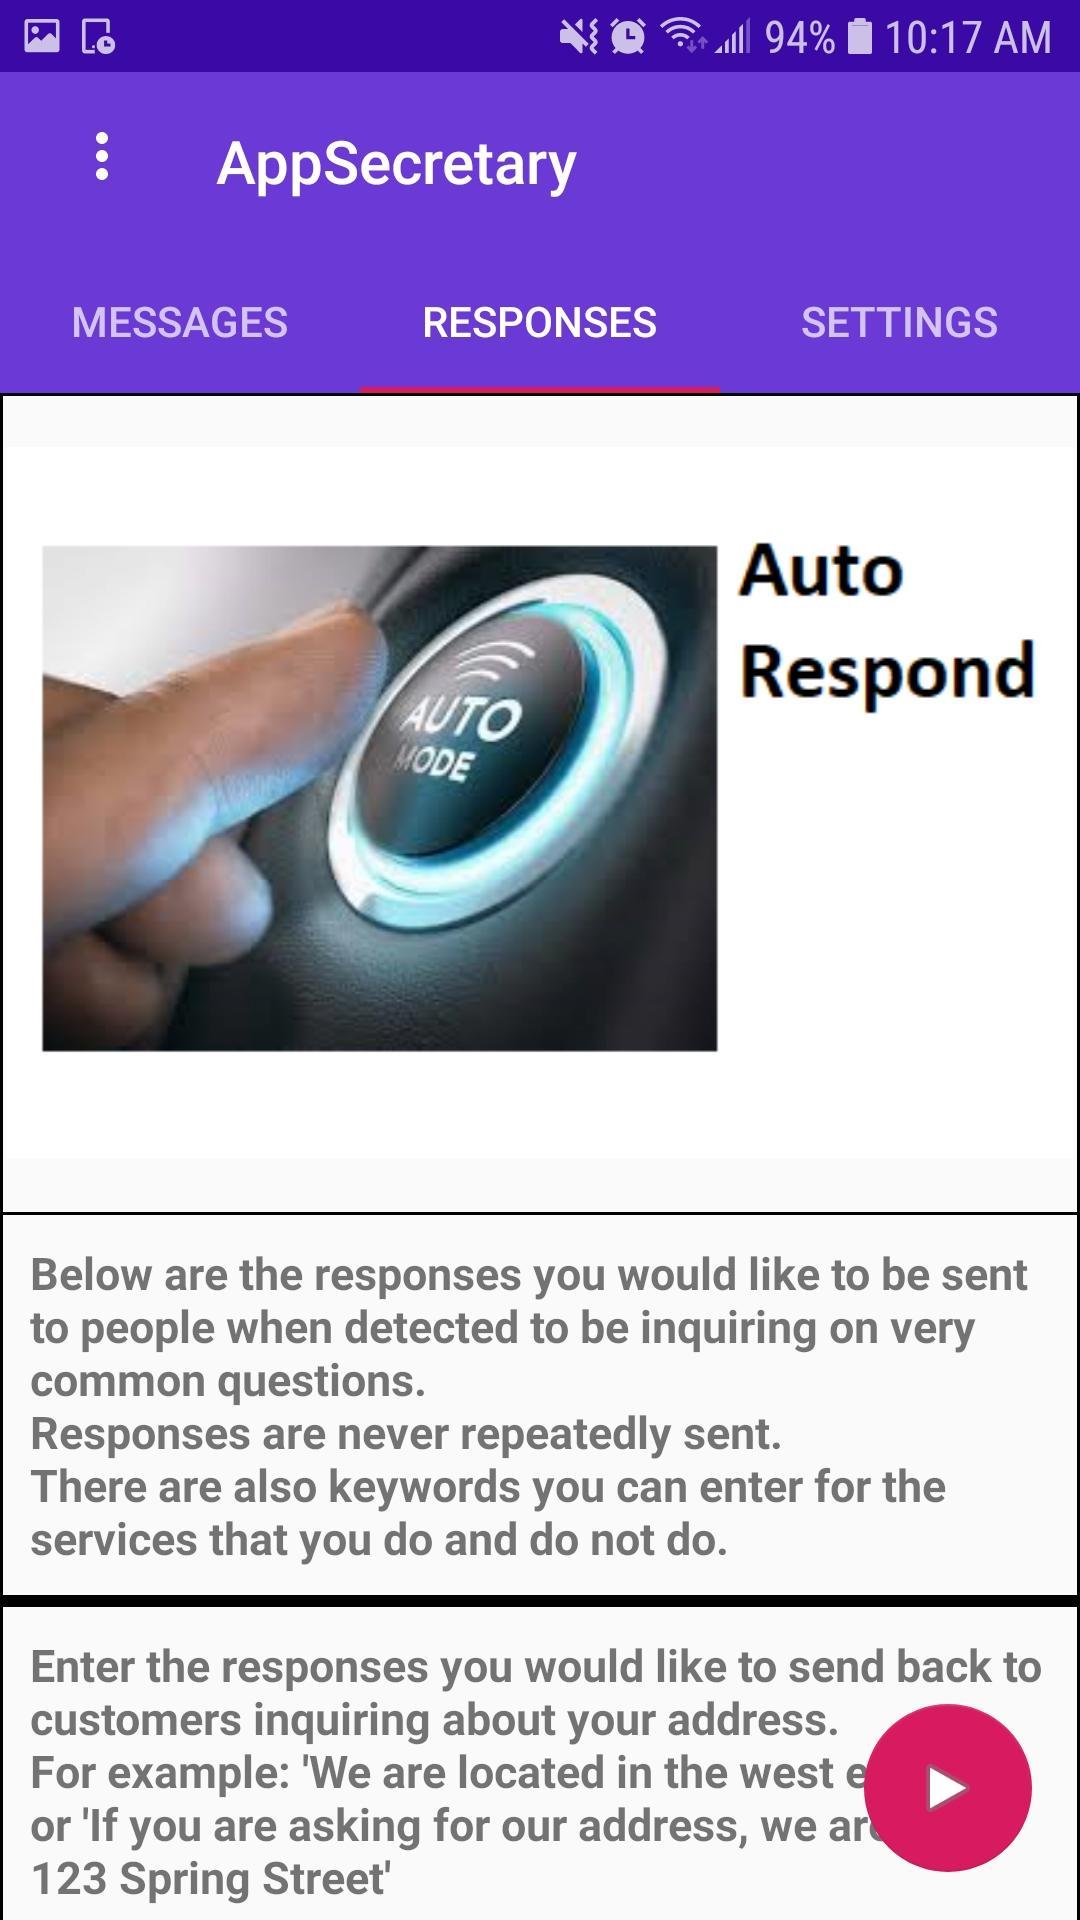 AppSecretary Auto Reply SMS Text Messages 1.16 Screenshot 4